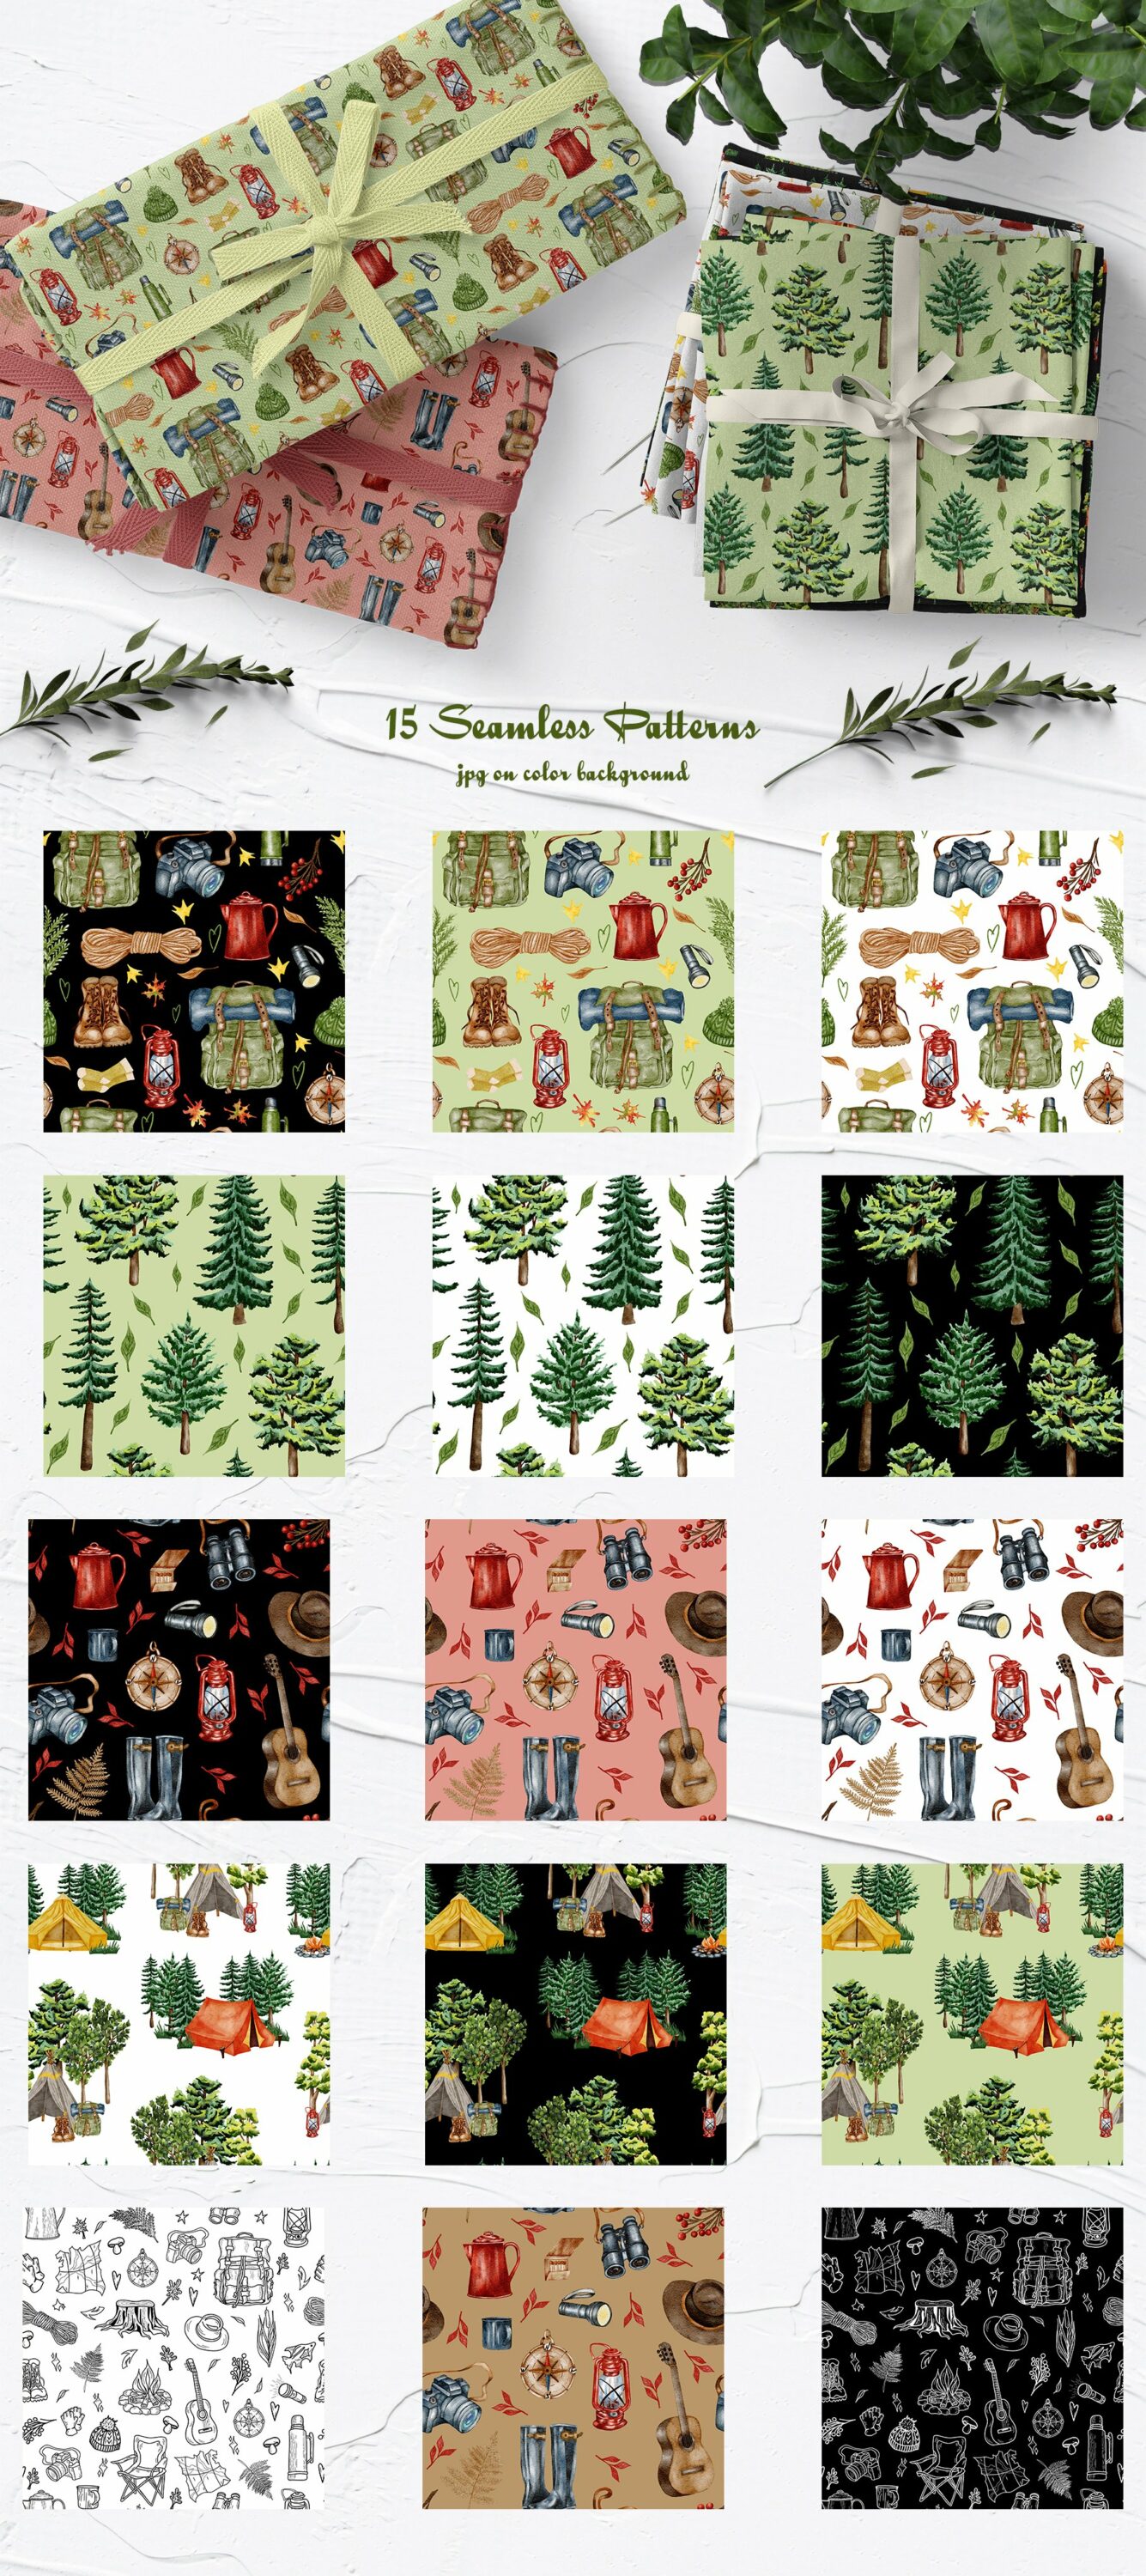 You will get 15 seamless patterns.